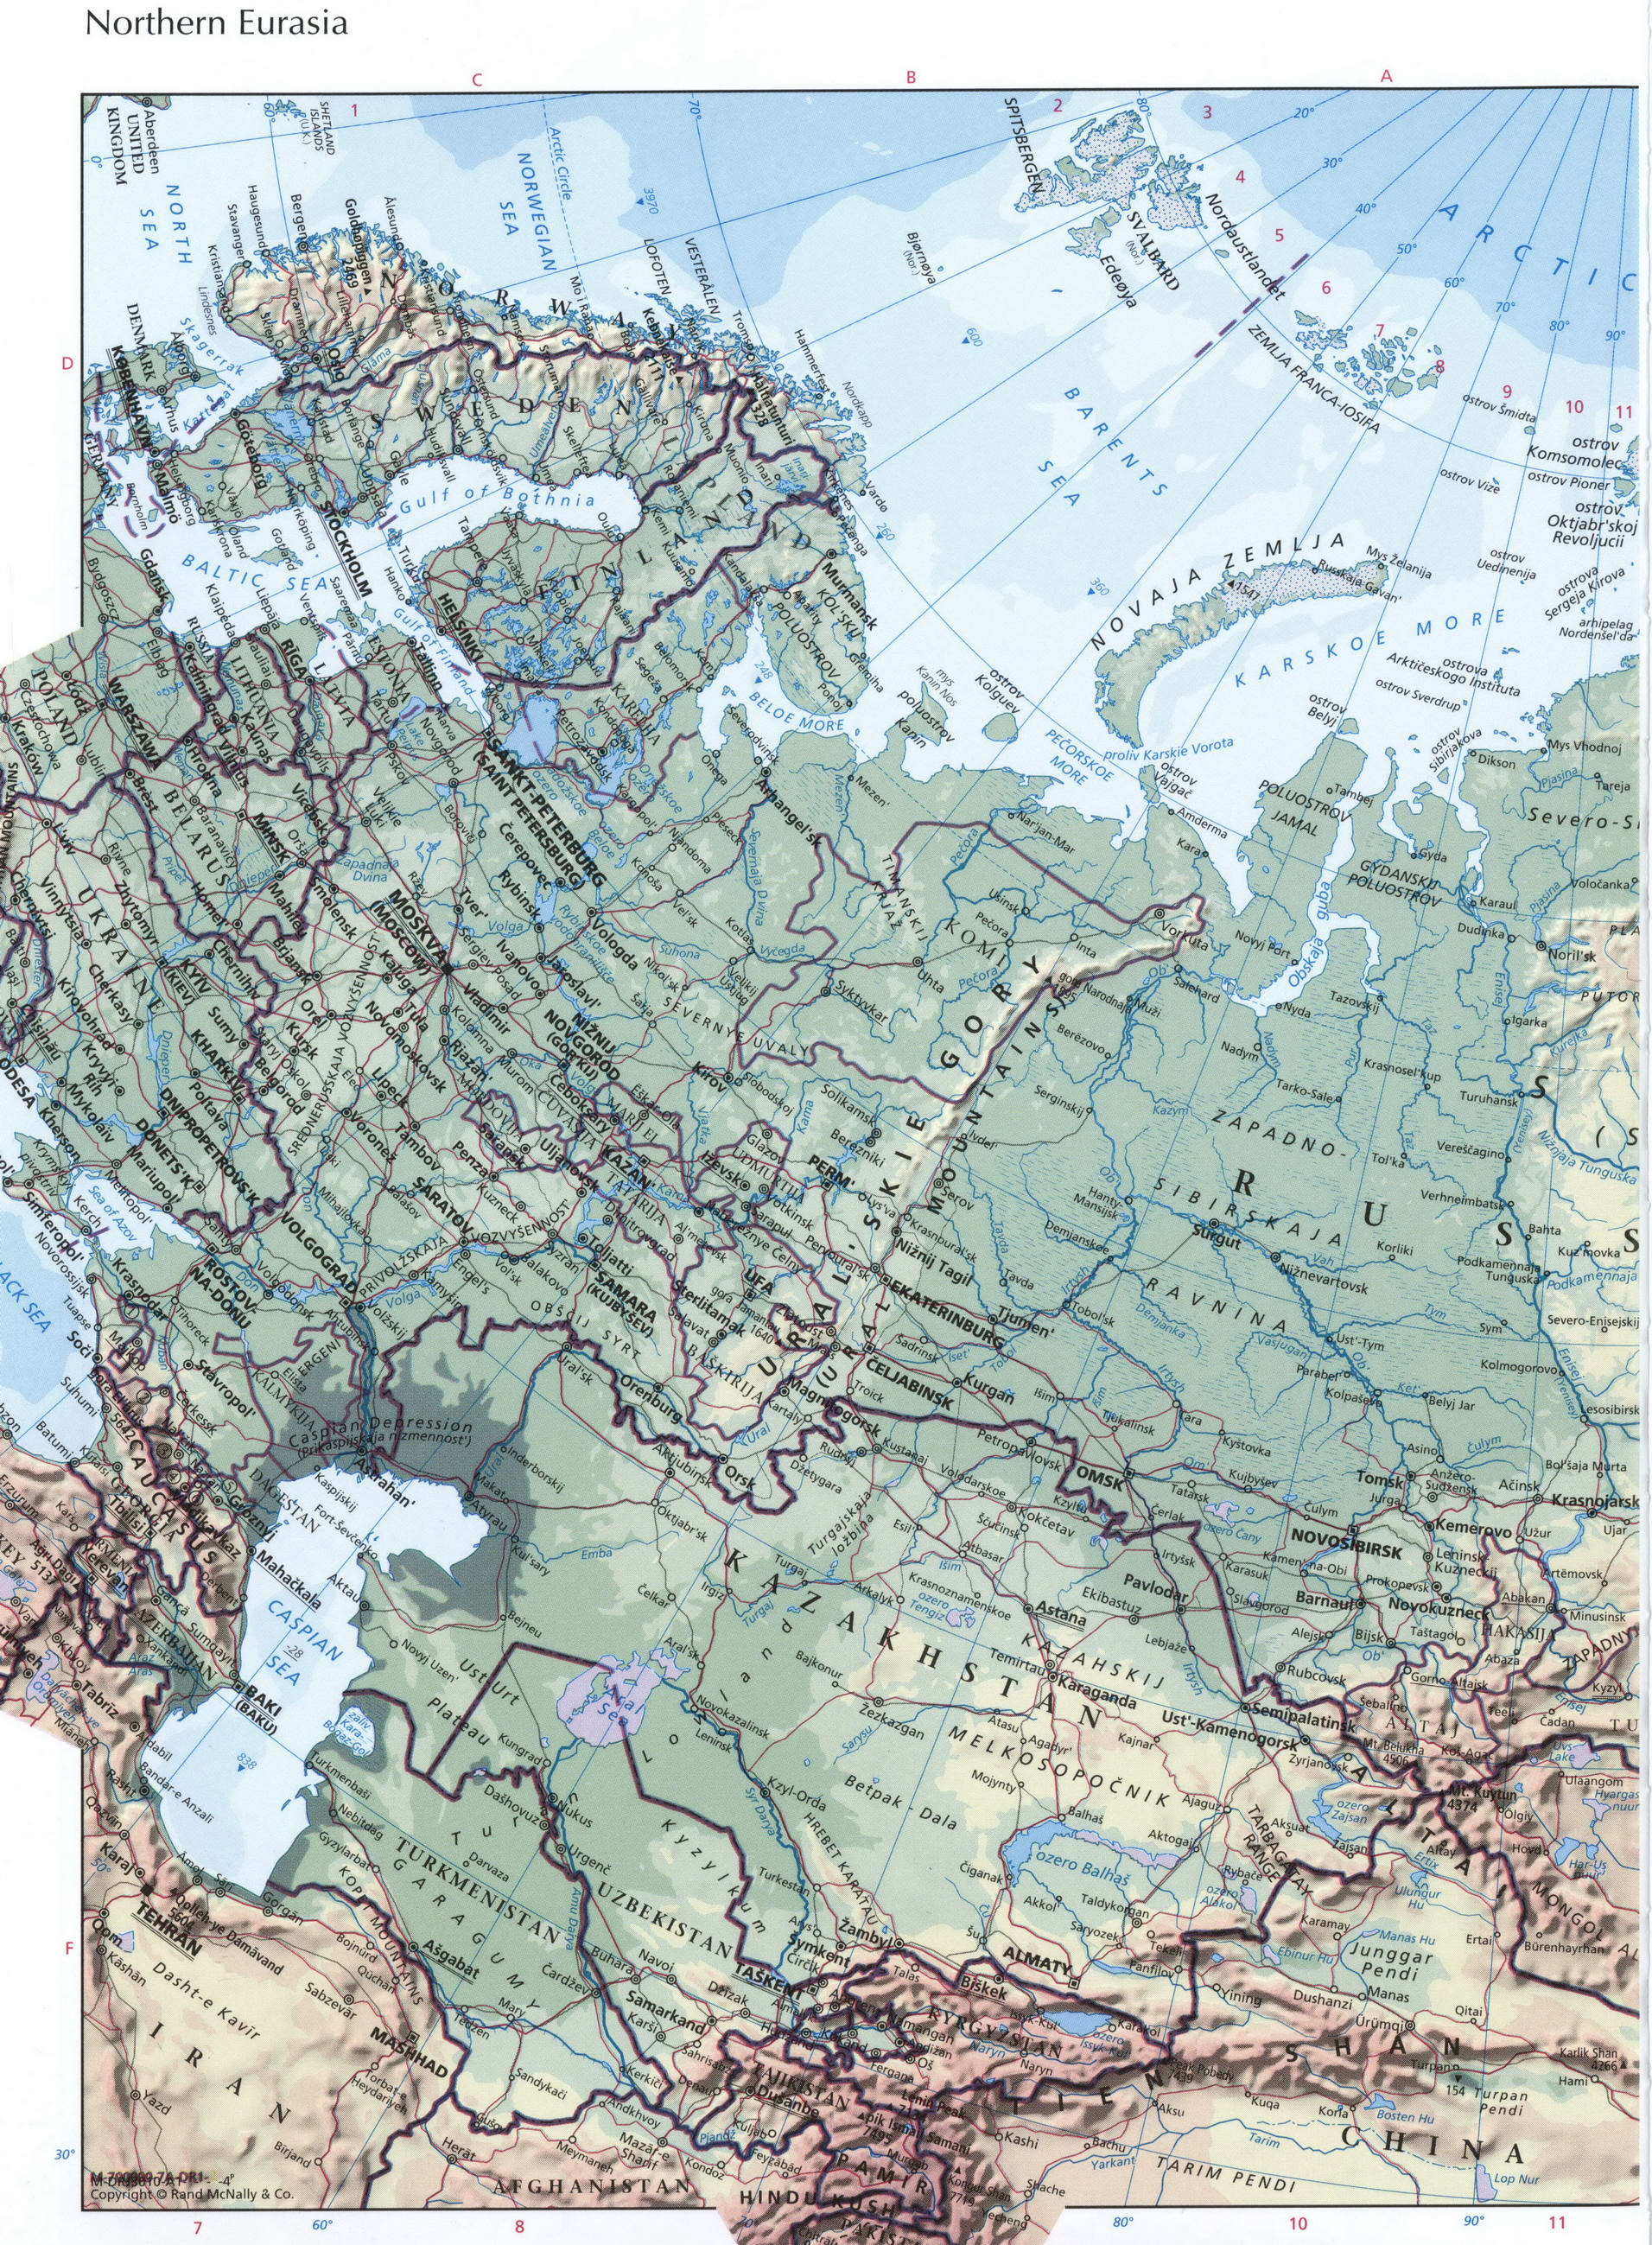 map of russia and northern eurasia